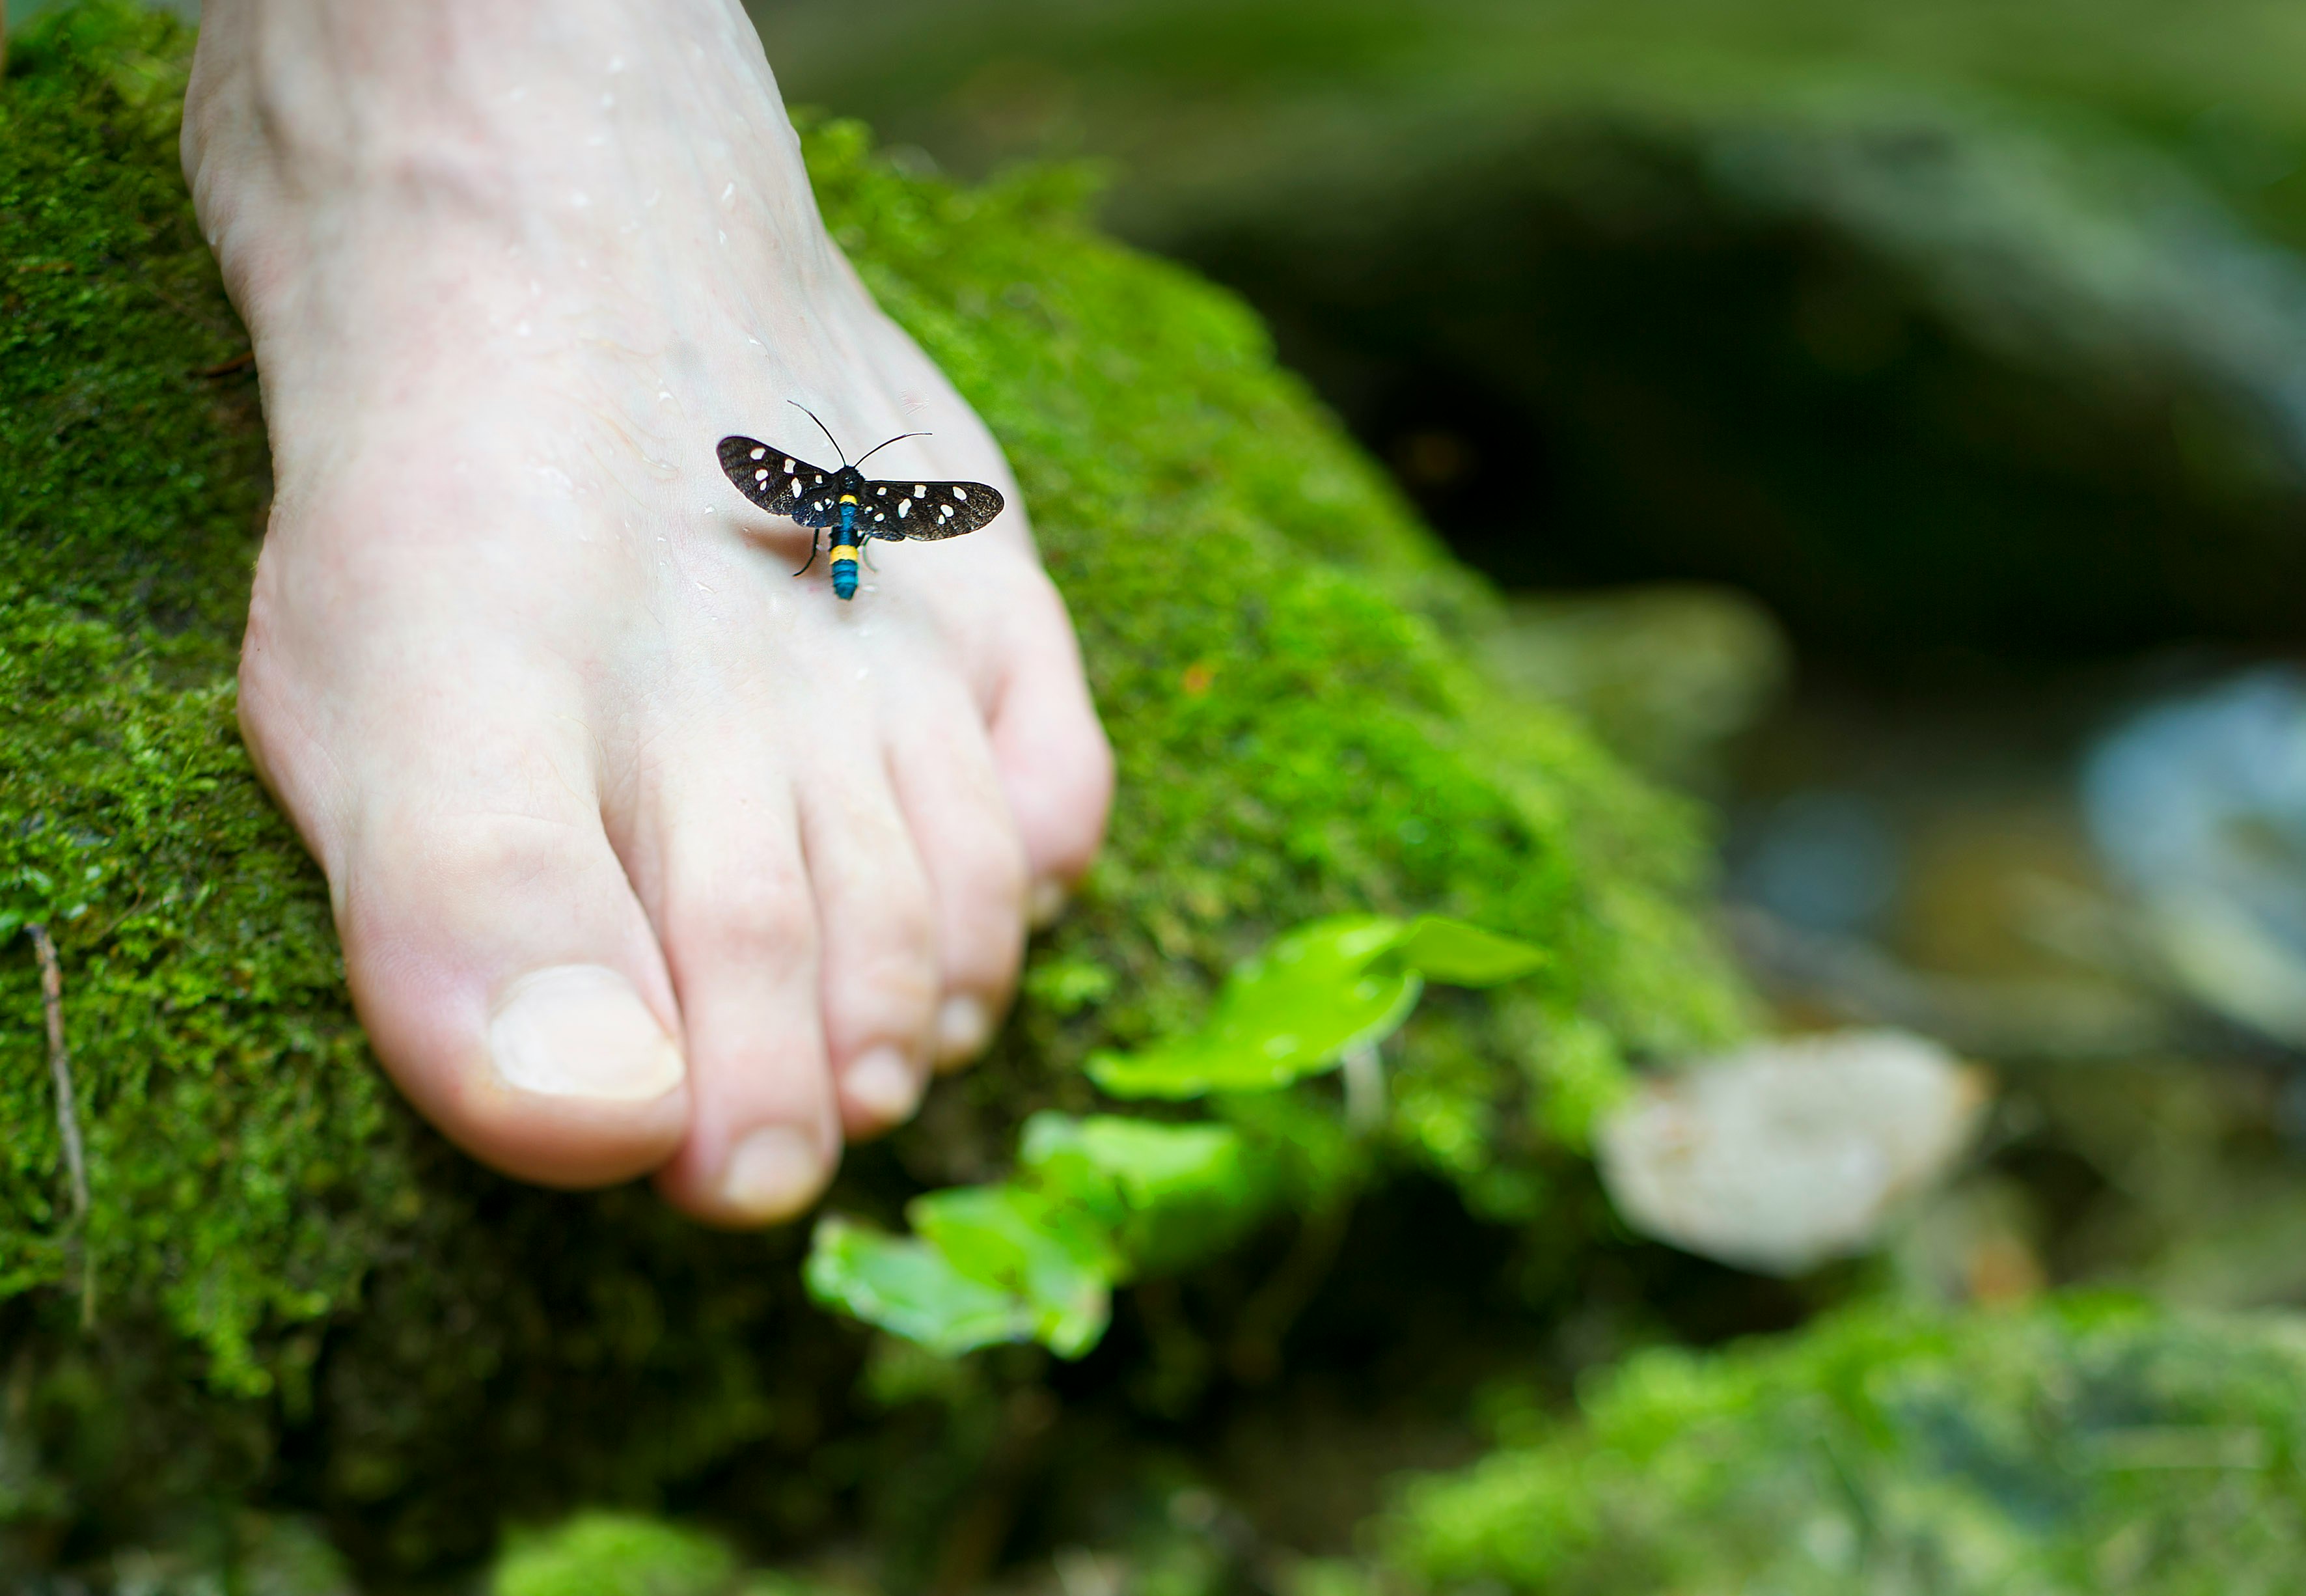 person's right foot with black and blue insect